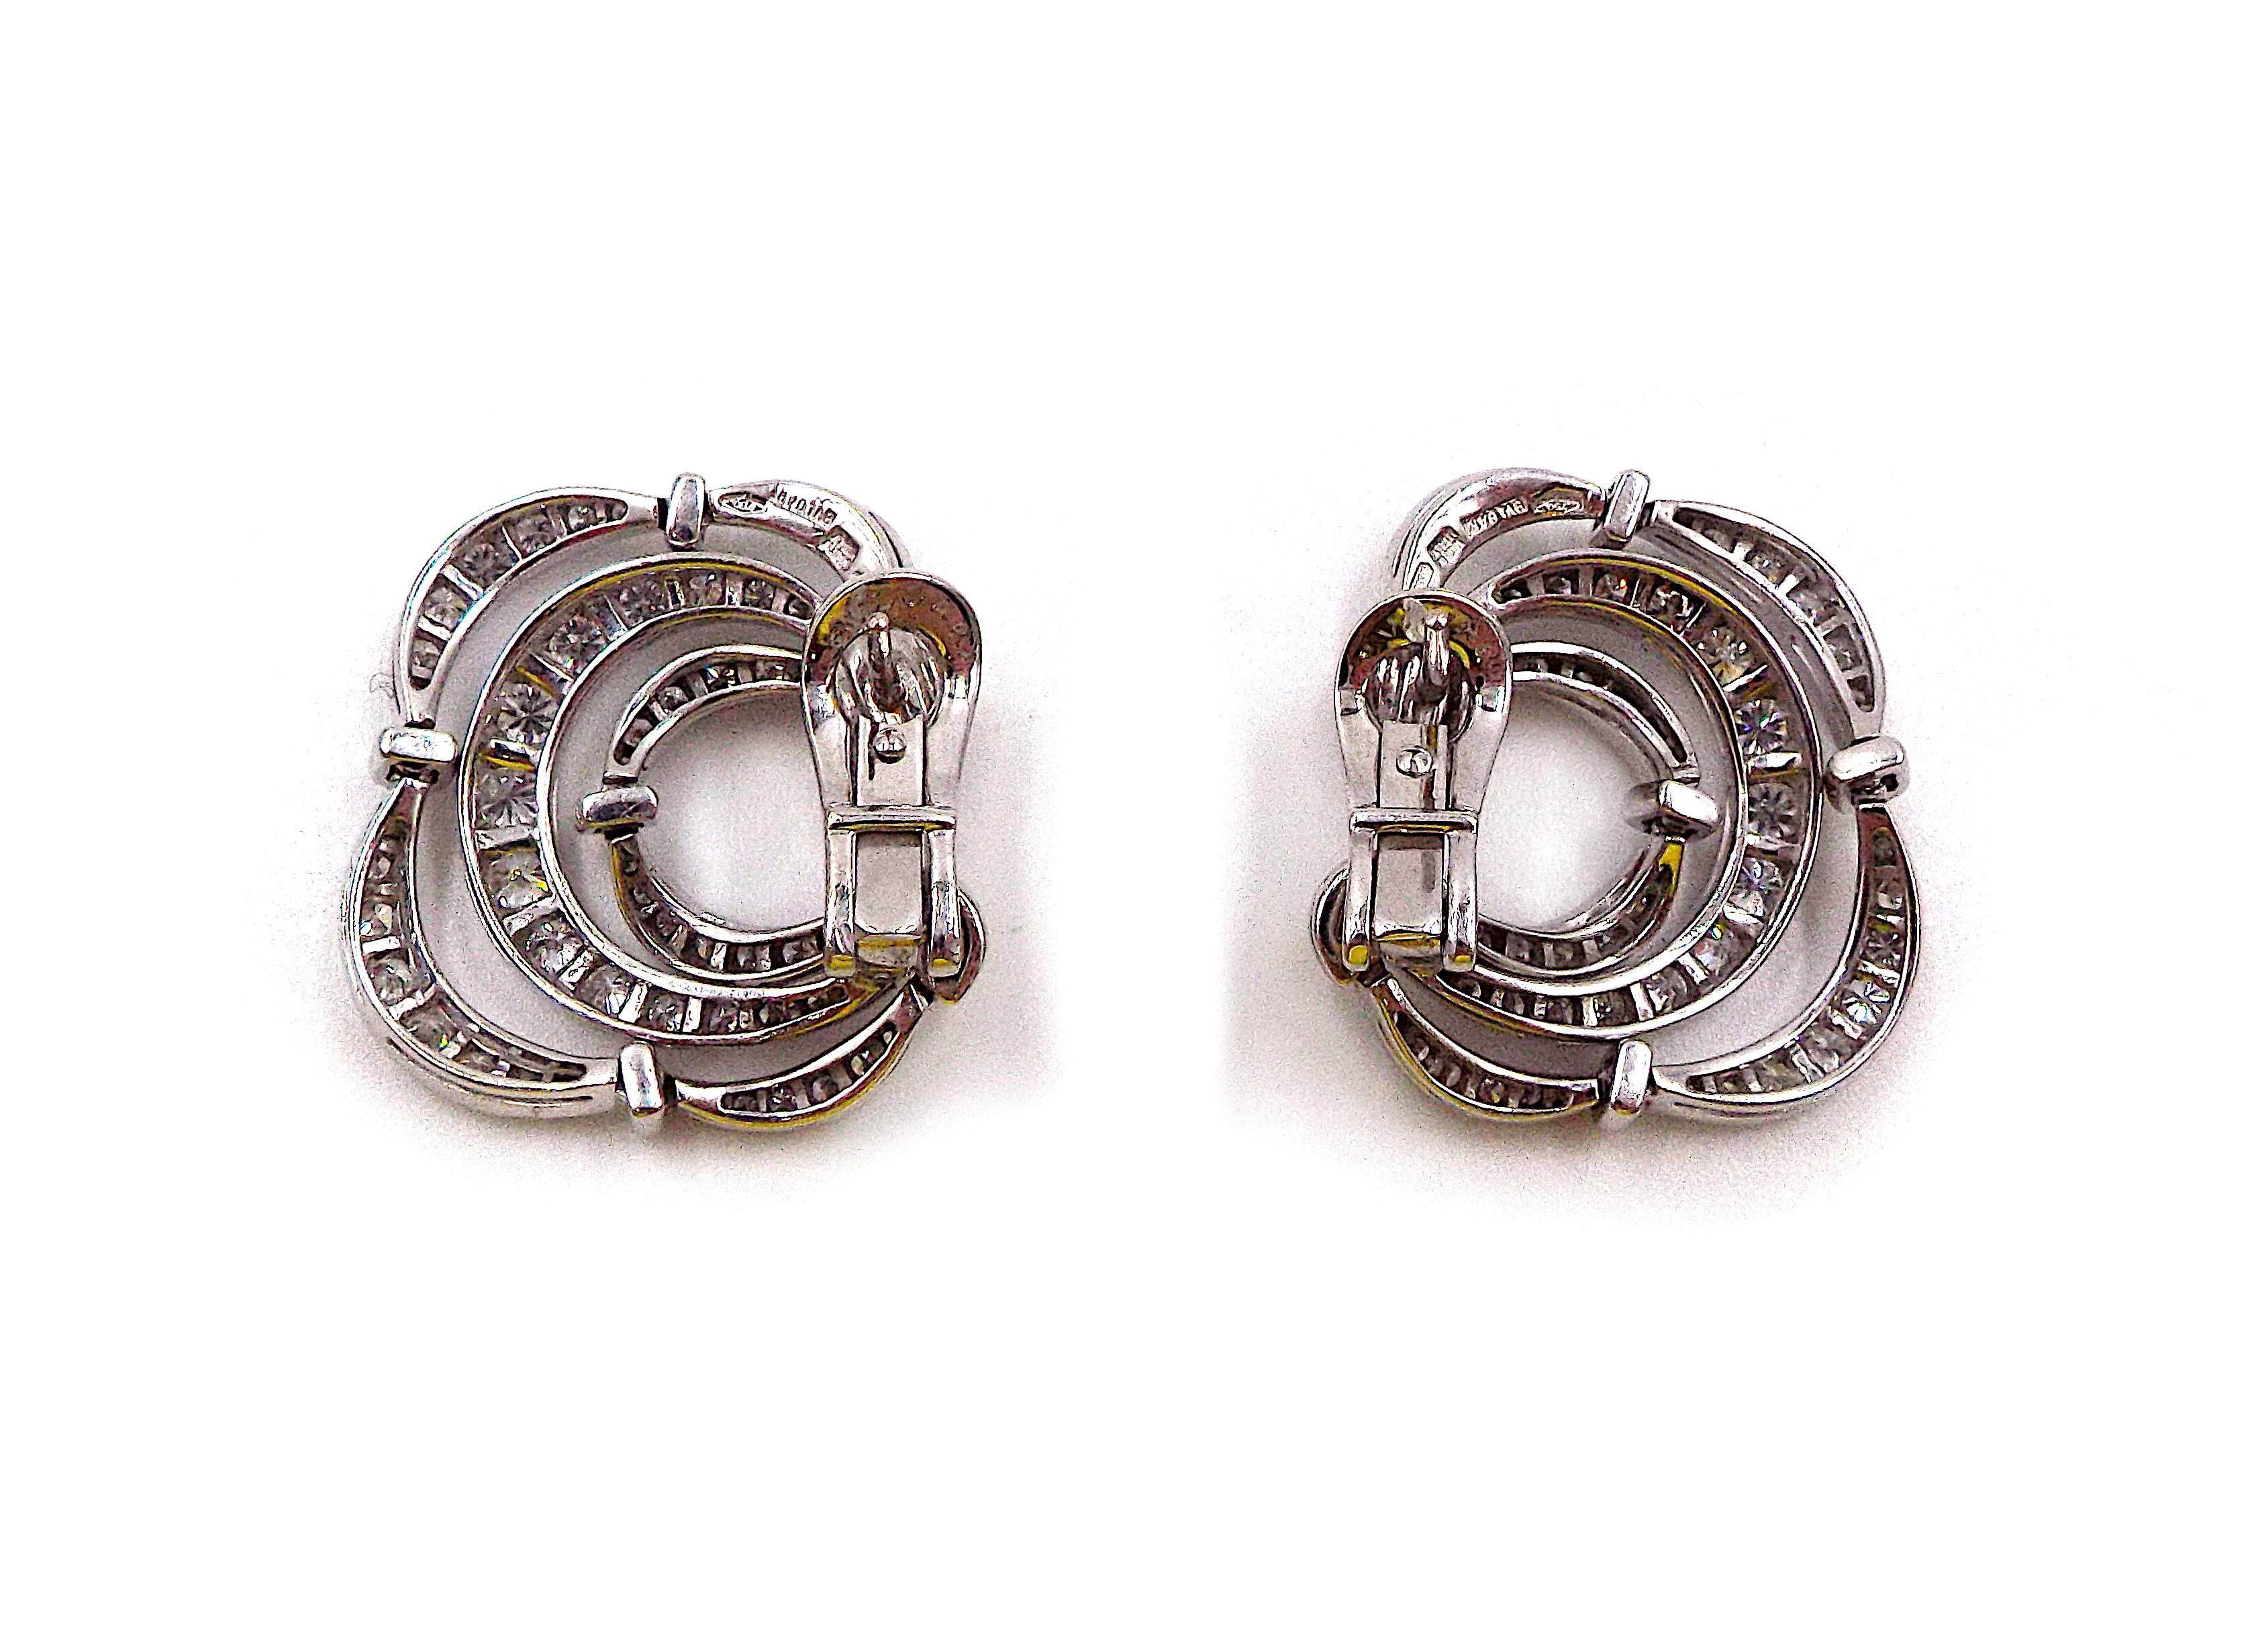 A pair of exceptional tremblant flower shaped earrings by Bulgari. 18K white gold, 5.75ct of diamonds. The outer circle of petals is slightly flexible. Each earring weighs 8.5 grams, diameter is approximately 1